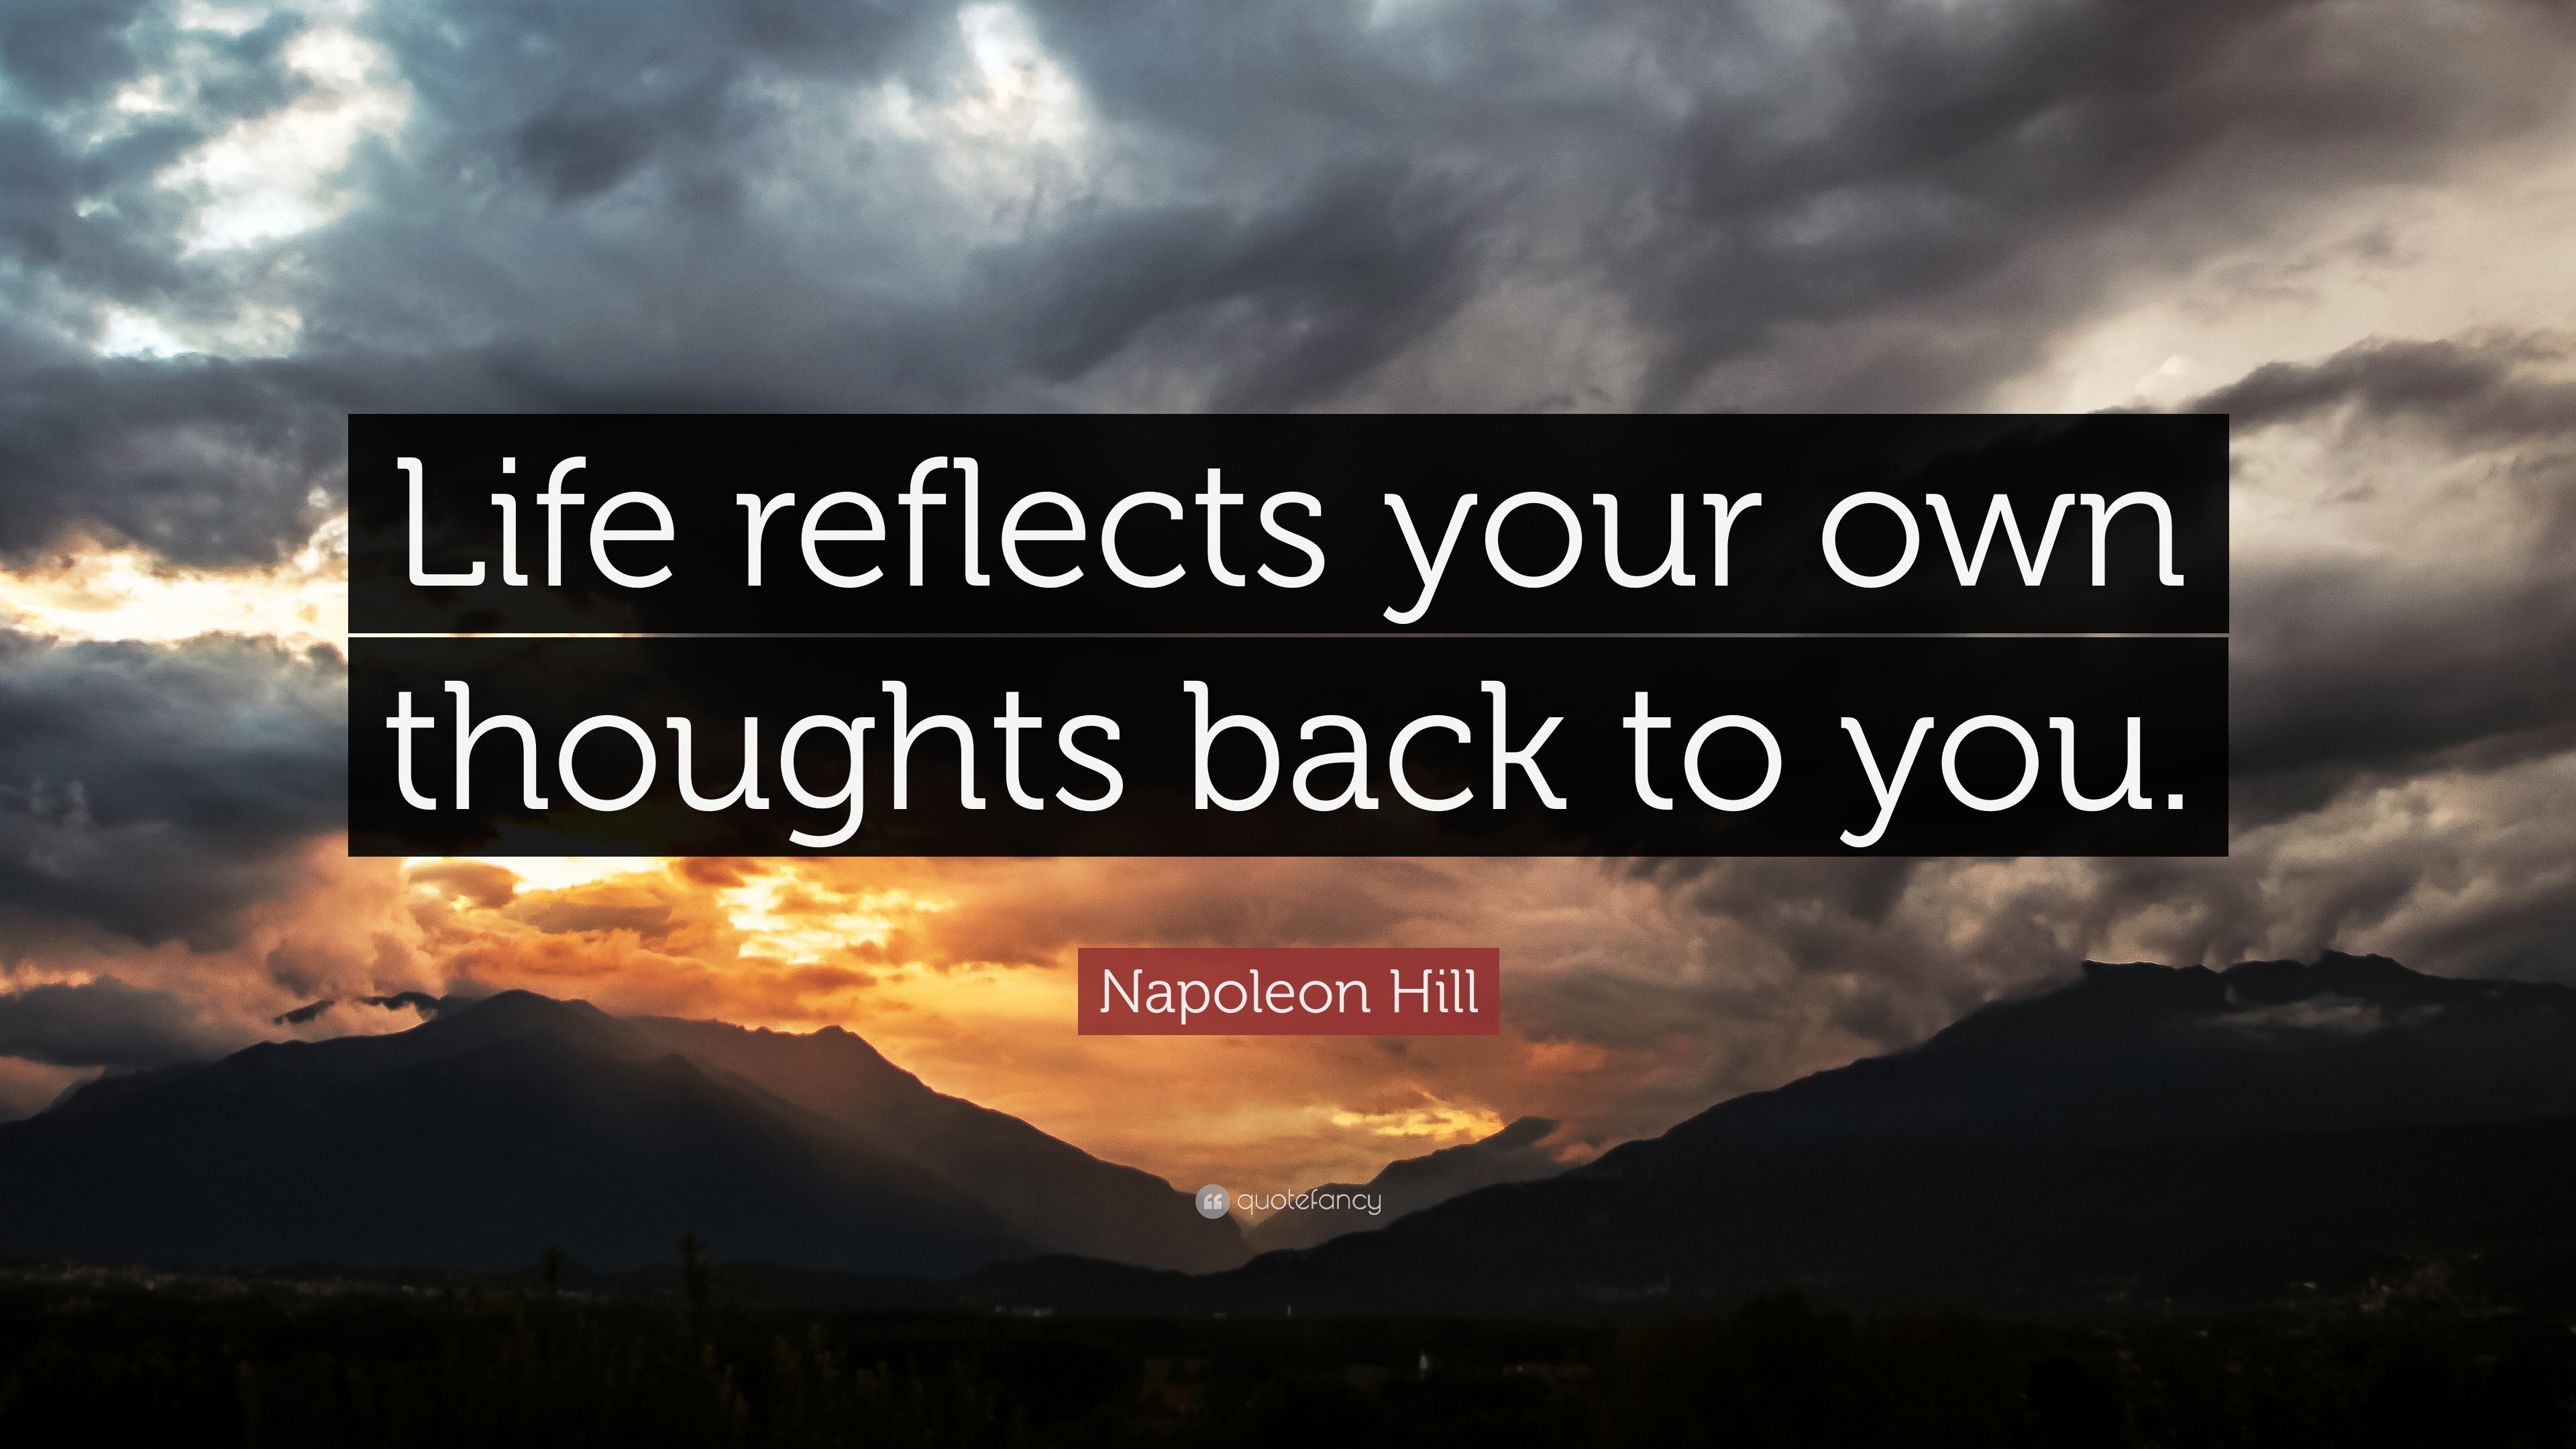 Napoleon Hill Quote: “Life reflects your own thoughts back to you.”